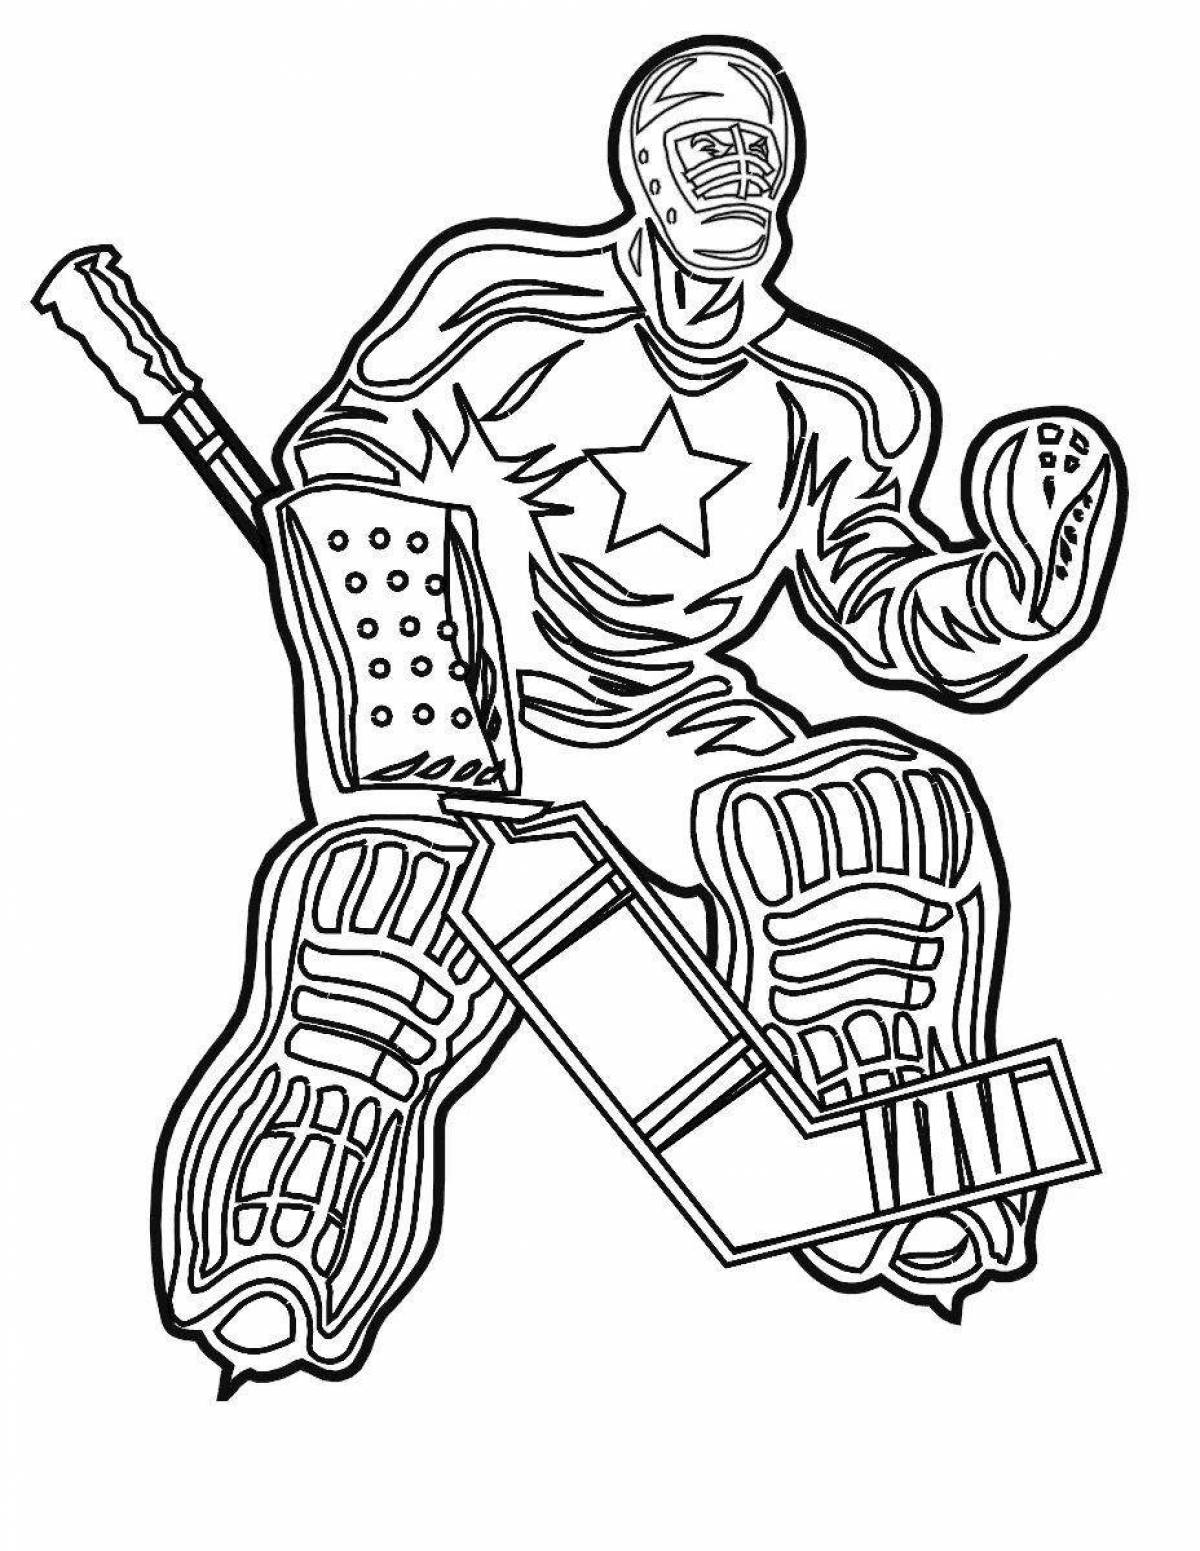 Coloring page of a spectacular hockey goalie